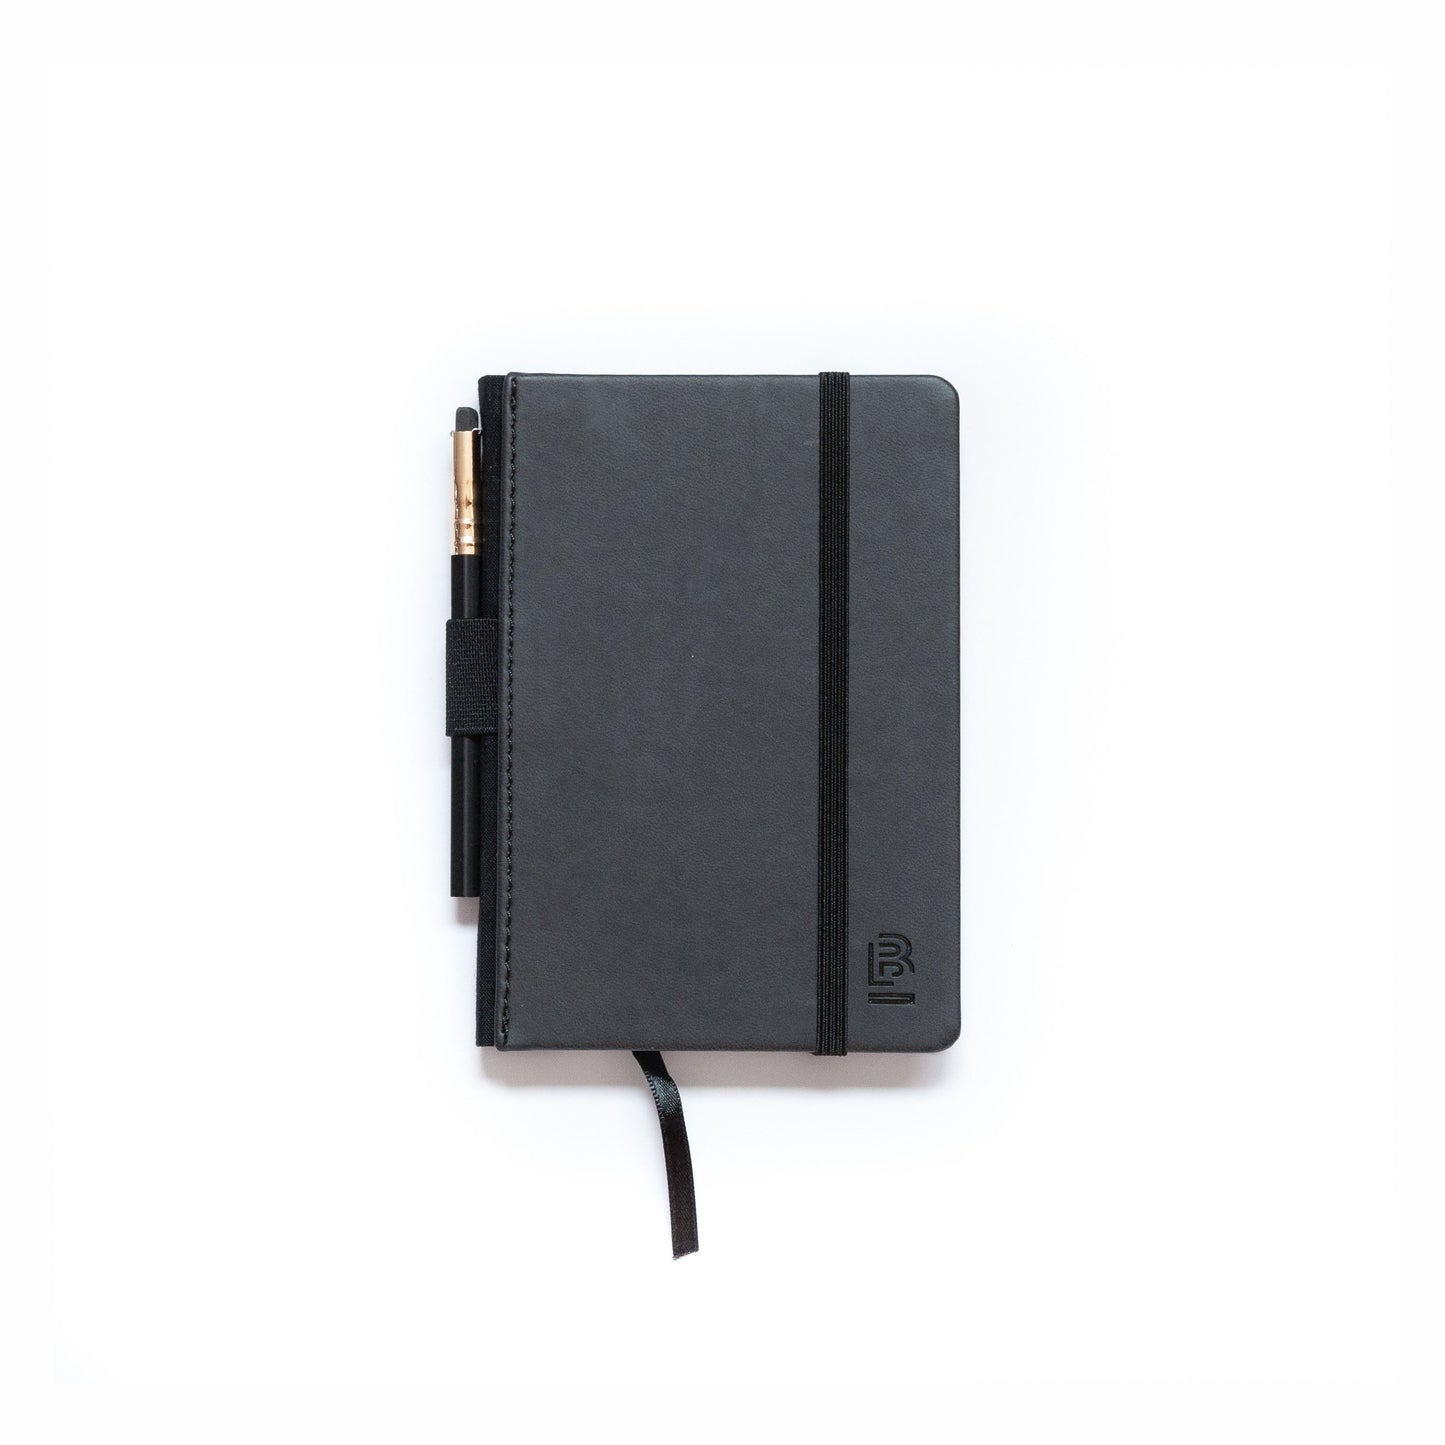 Blackwing Small Slate Notebook